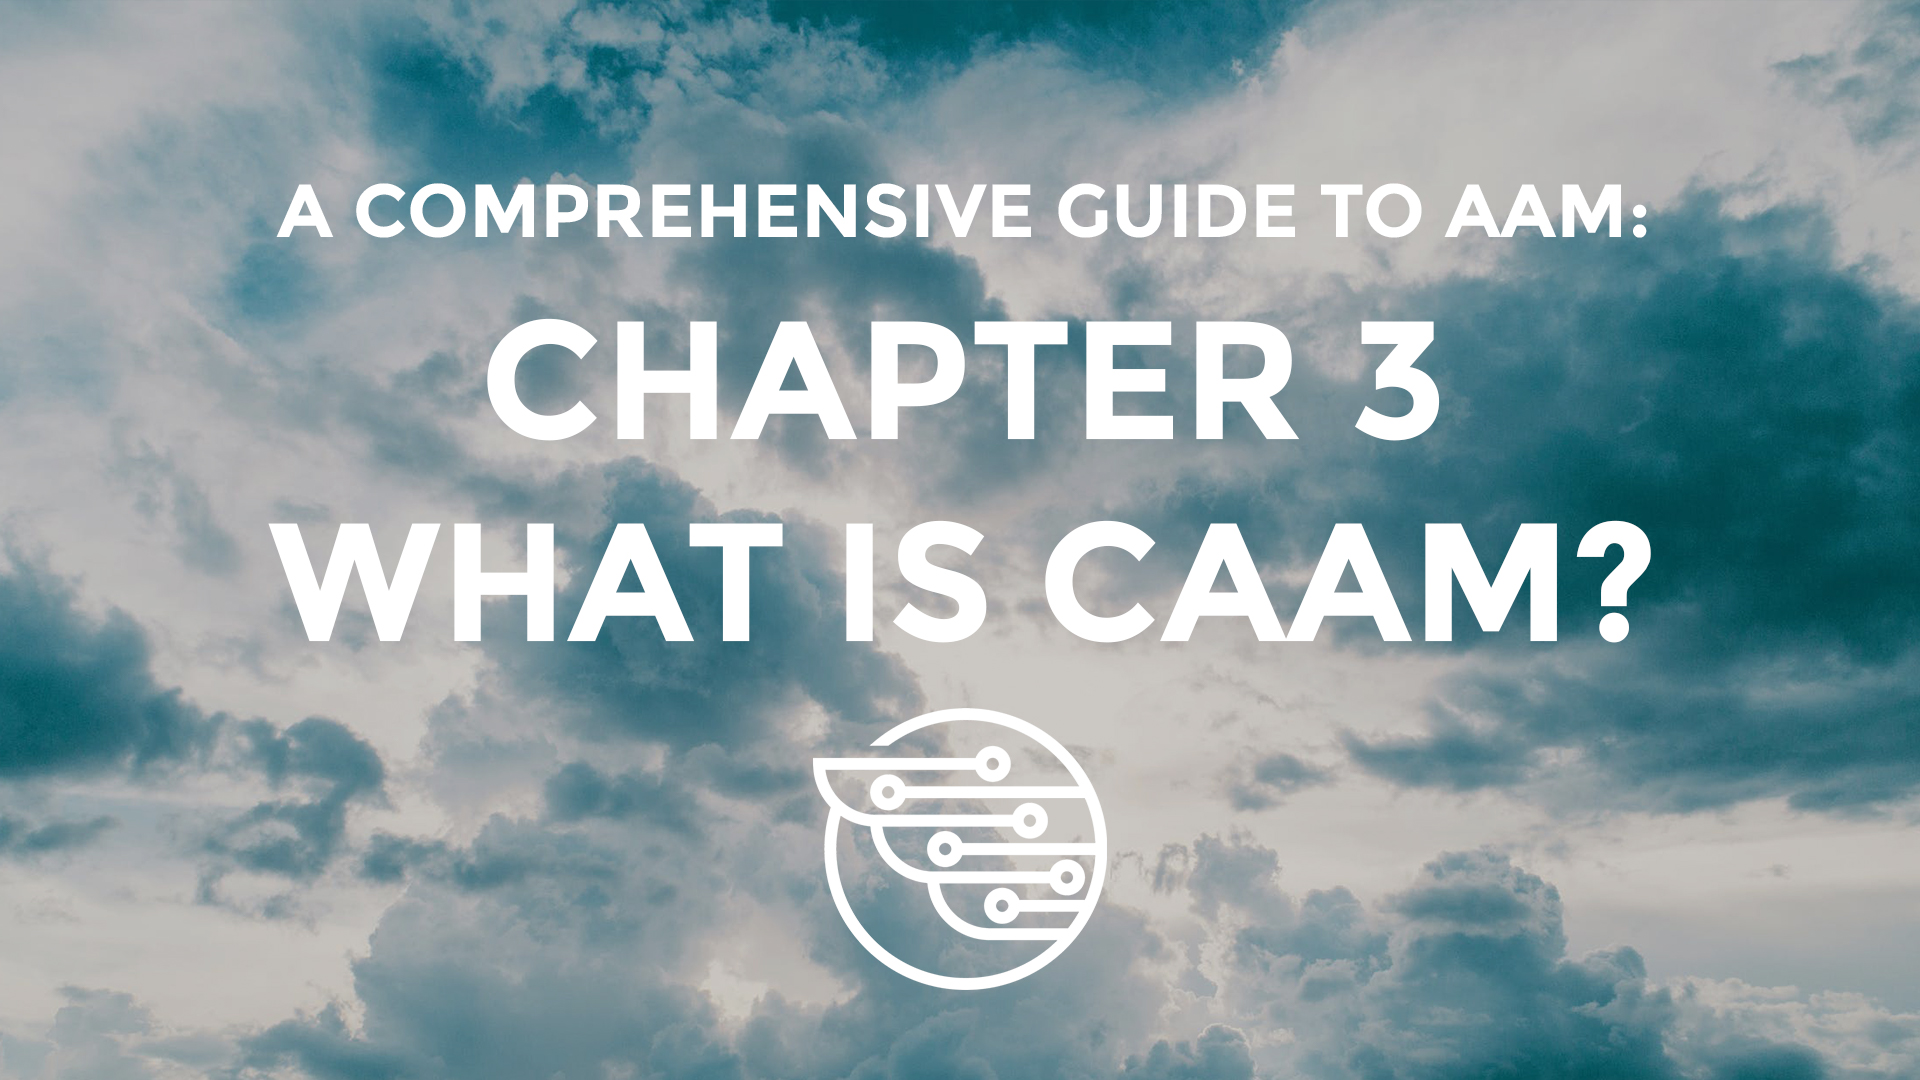 What is CAAM?